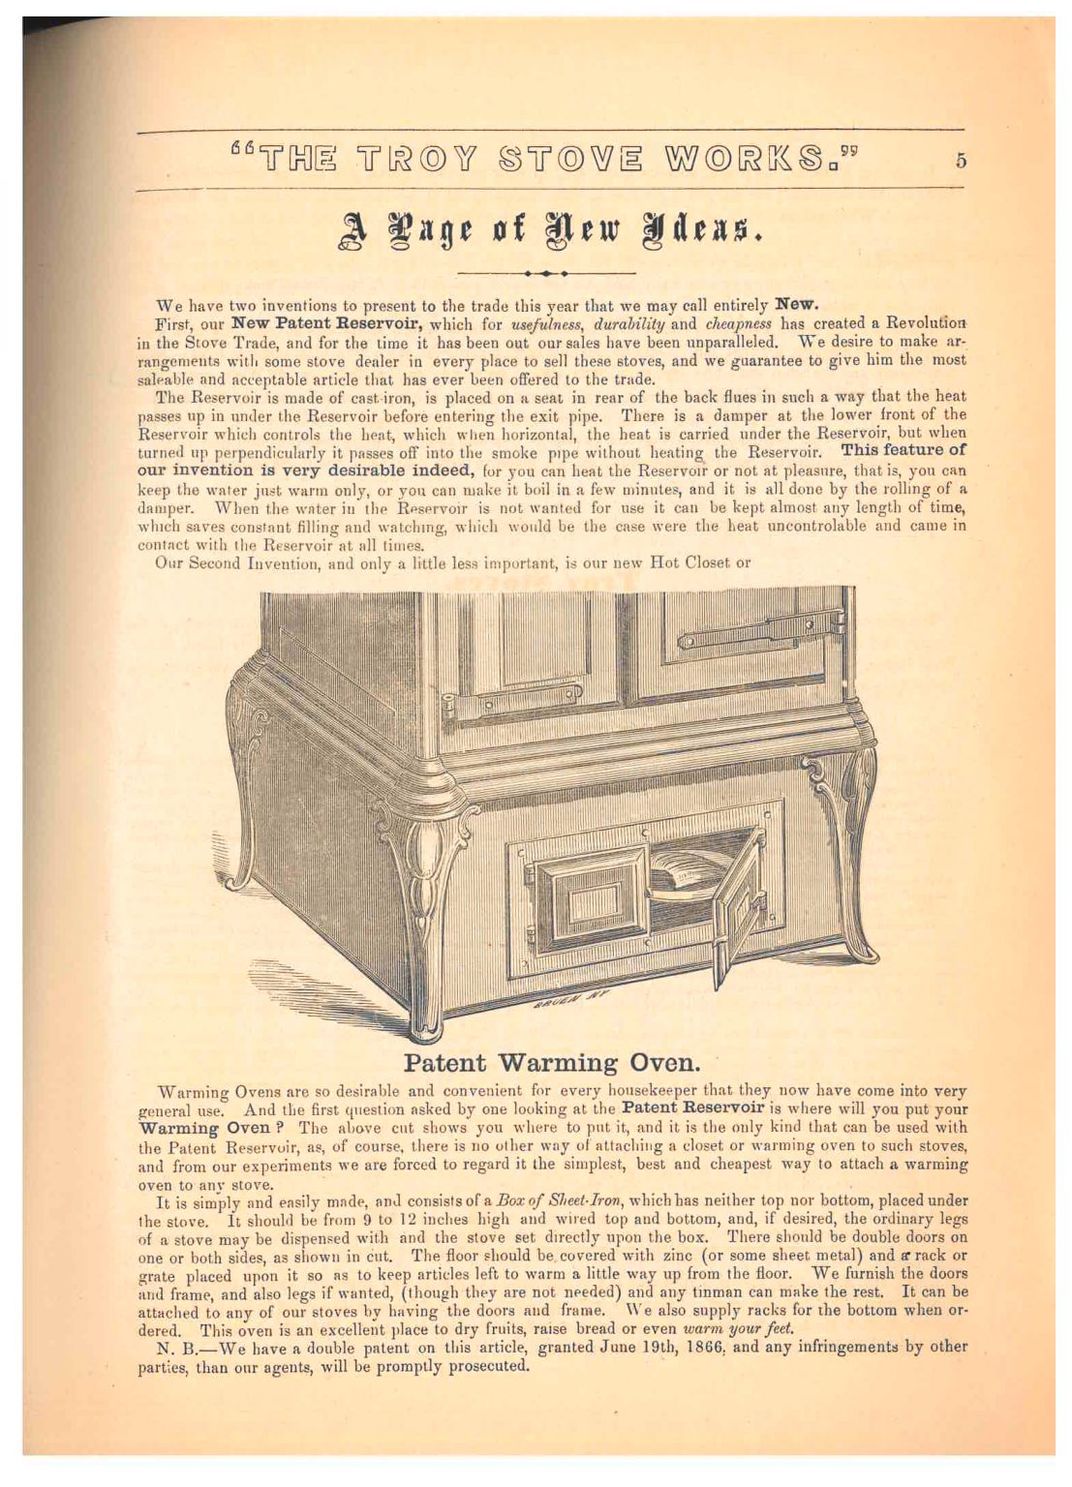 Page from trade catalog with text and illustration of small warming oven under stove